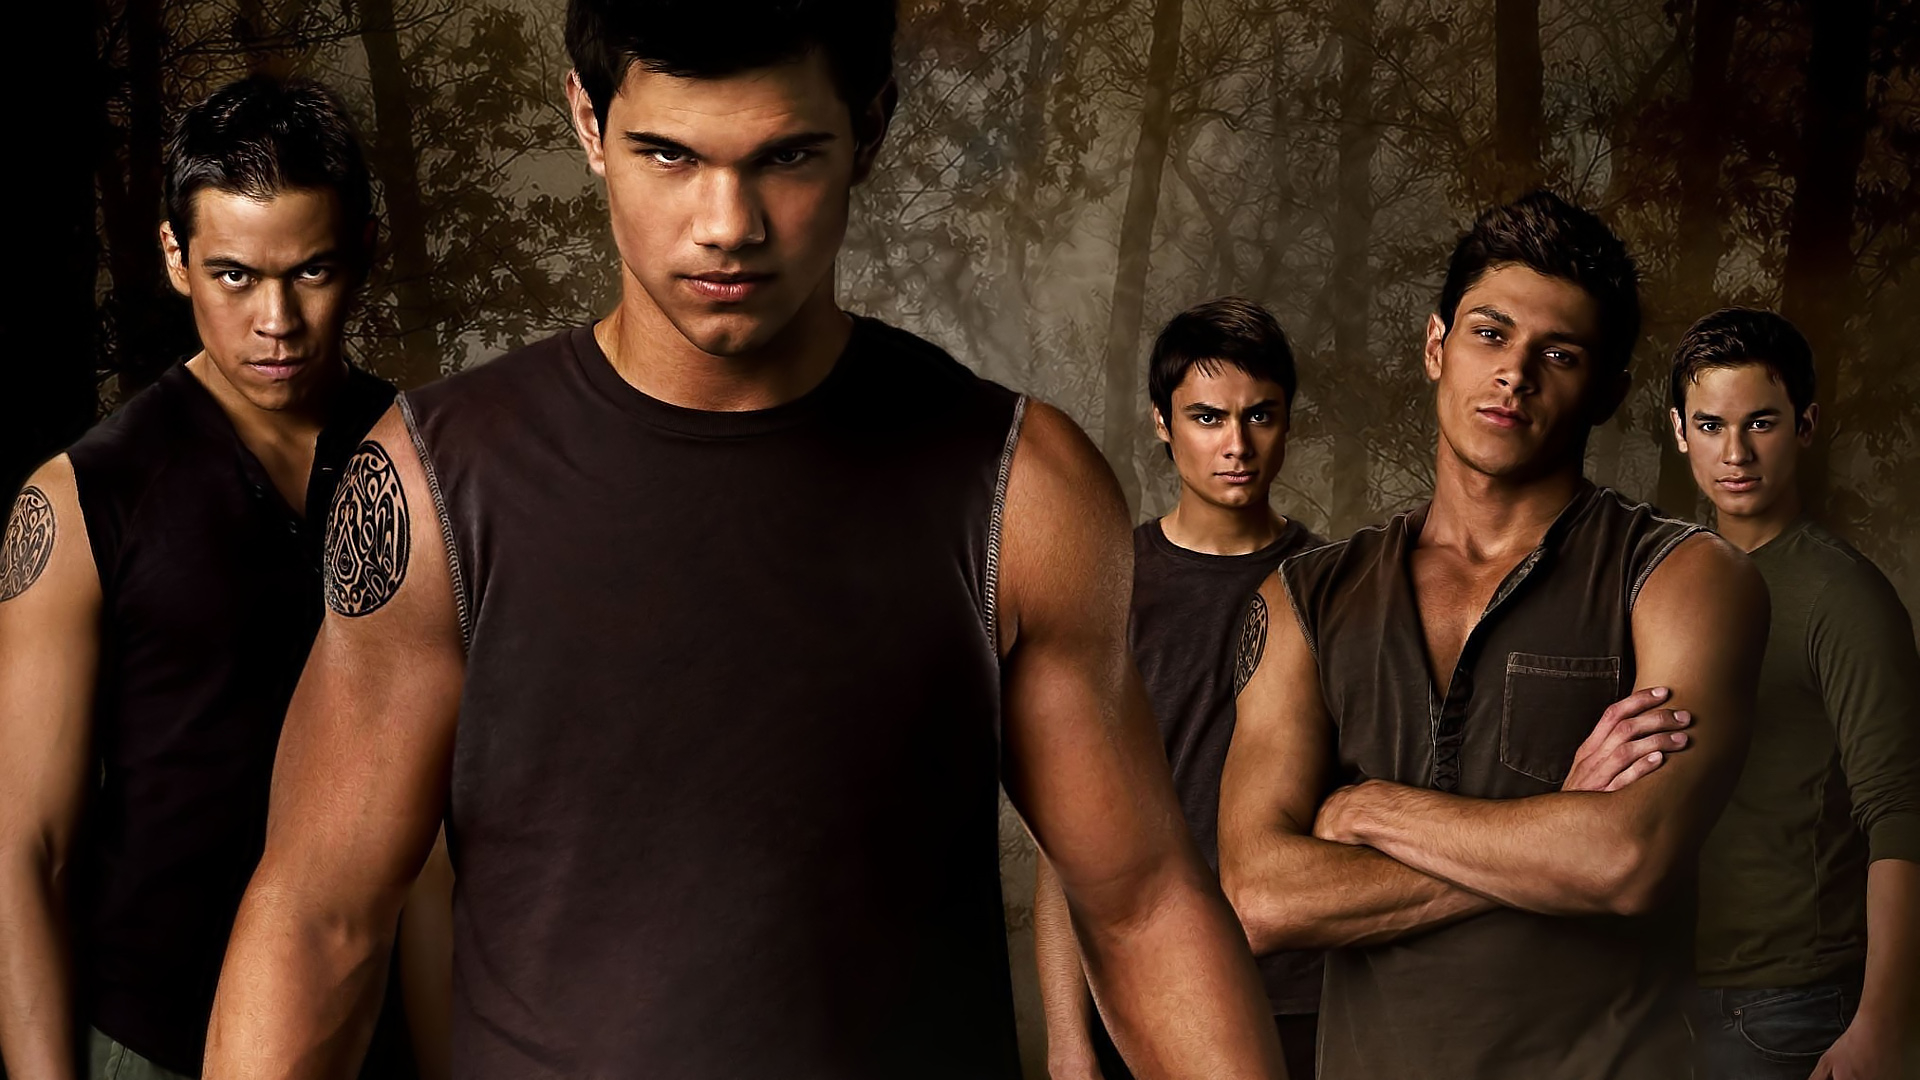 1920x1080 30+ Jacob Black HD Wallpapers and Backgrounds